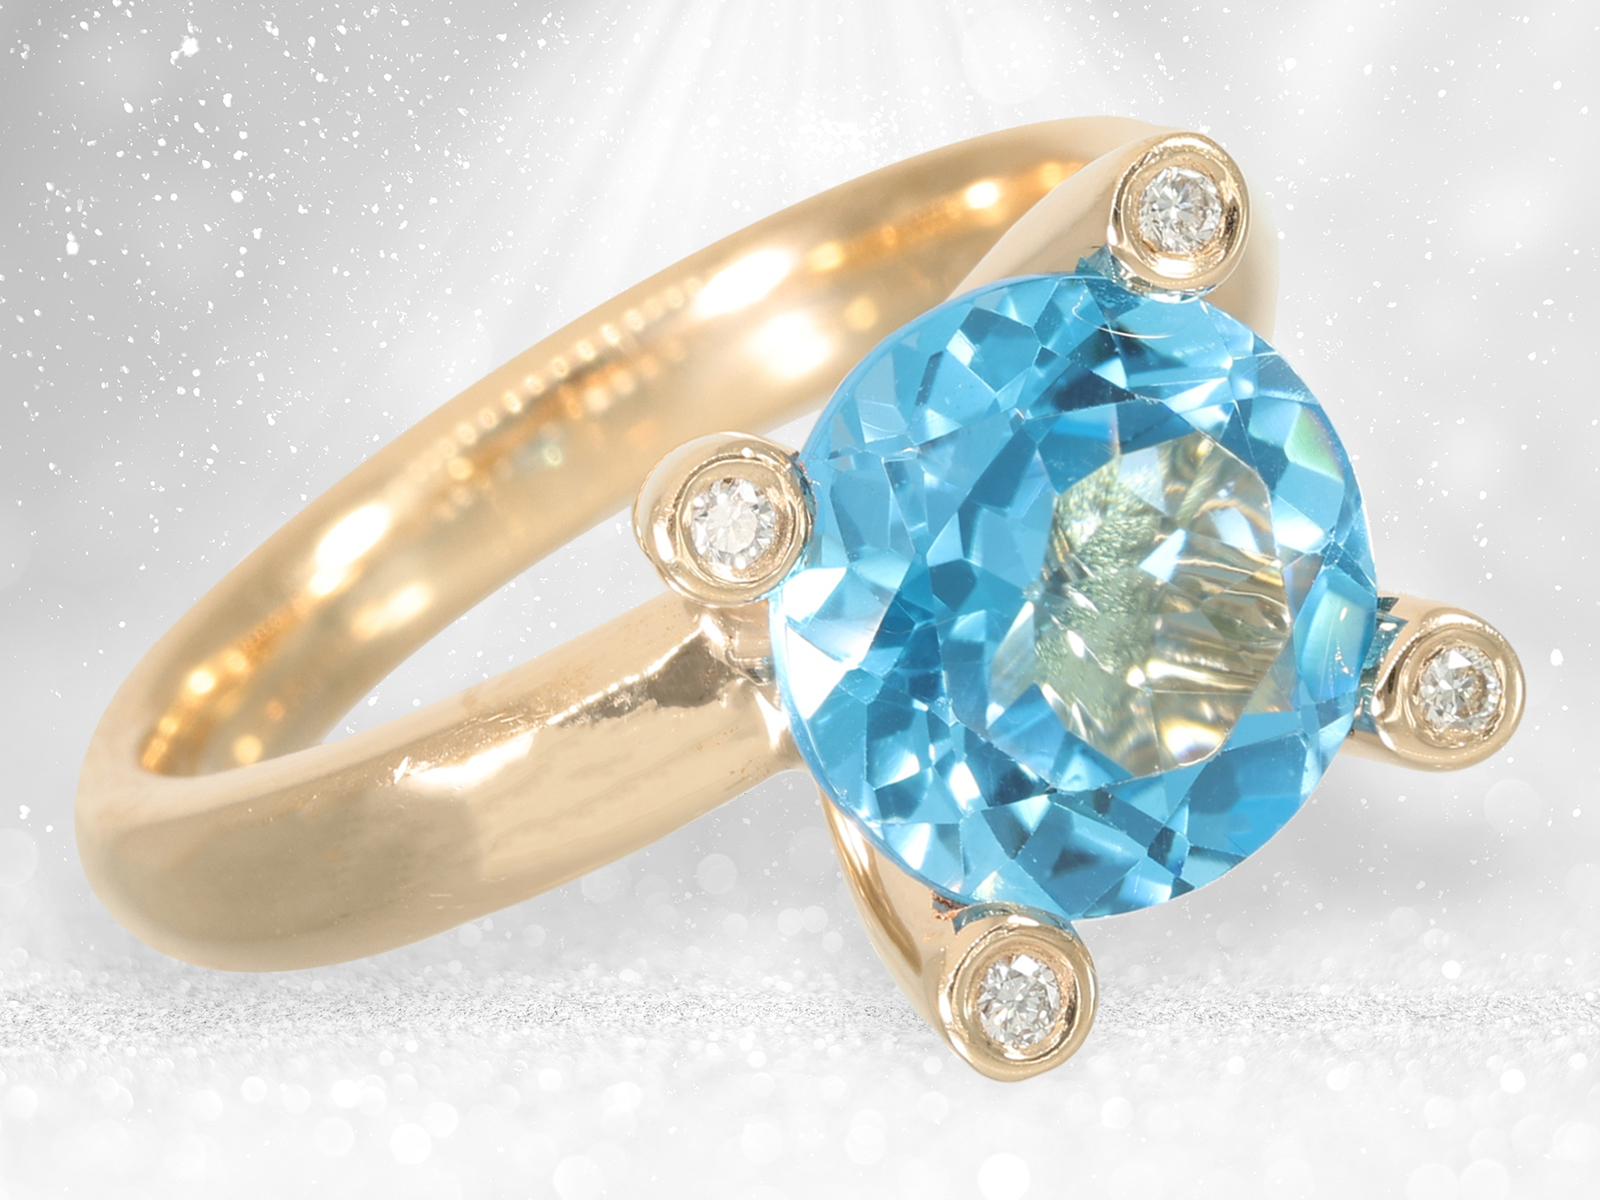 Fancy and decorative solid gold ring with beautiful blue topaz and brilliant-cut diamonds - Image 3 of 4